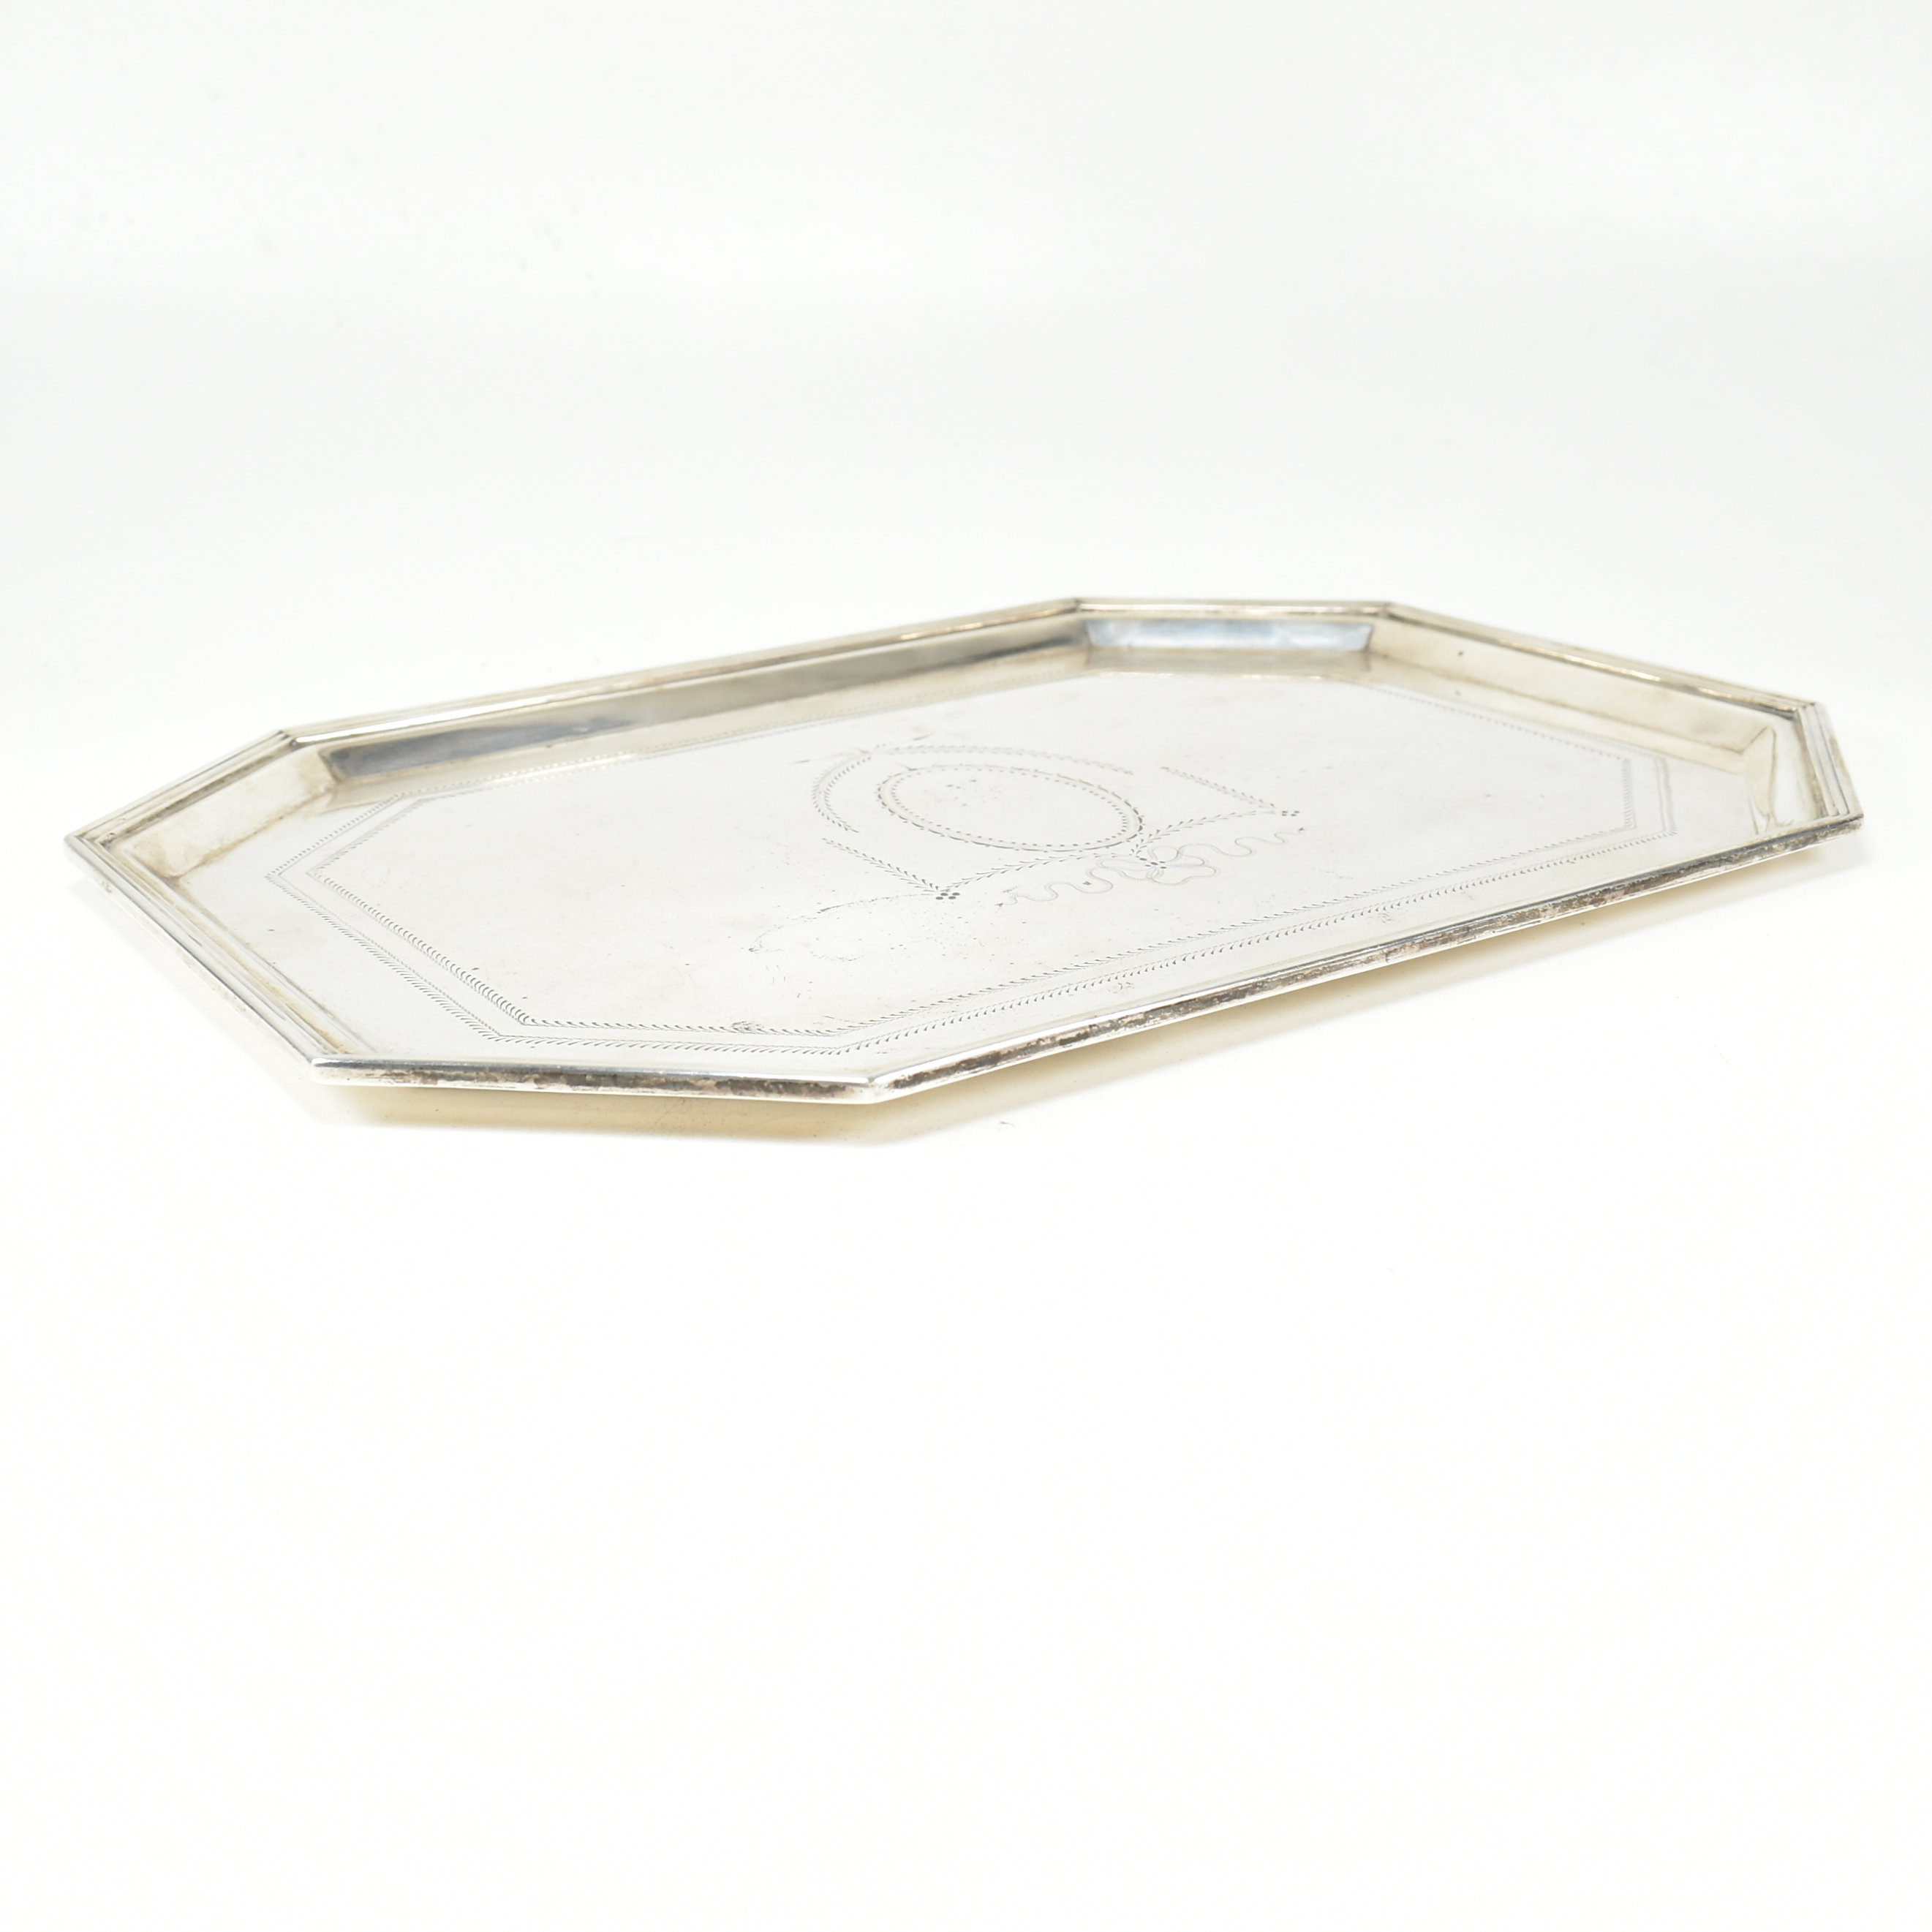 1930S HALLMARKED SILVER TRAY - Image 2 of 6